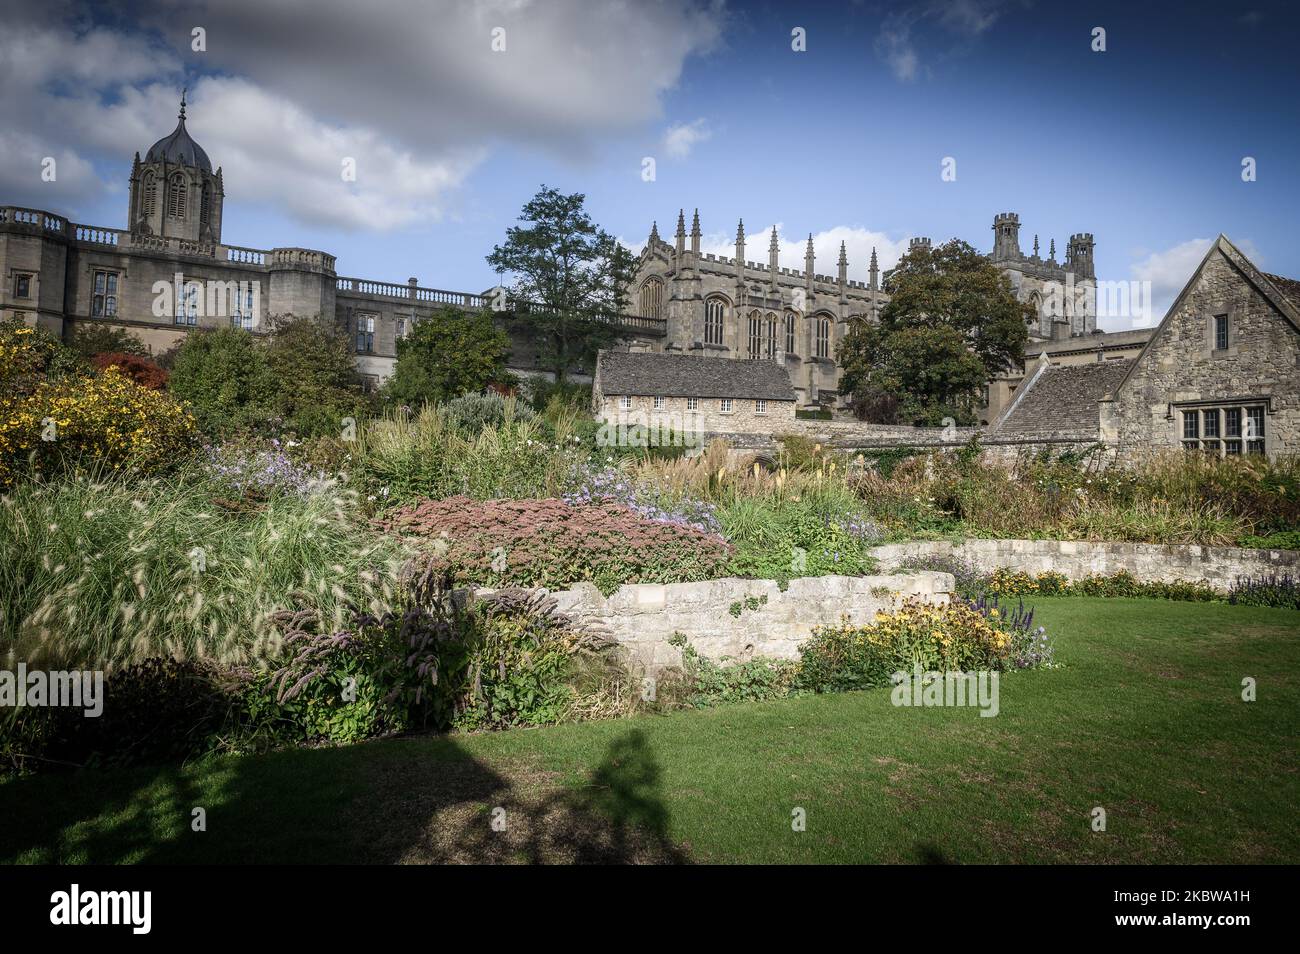 Images of Oxford, Oxfordshire, England, UK. Christ Churech. aPicture by Paul Heyes, Monday October 10, 2022. Stock Photo